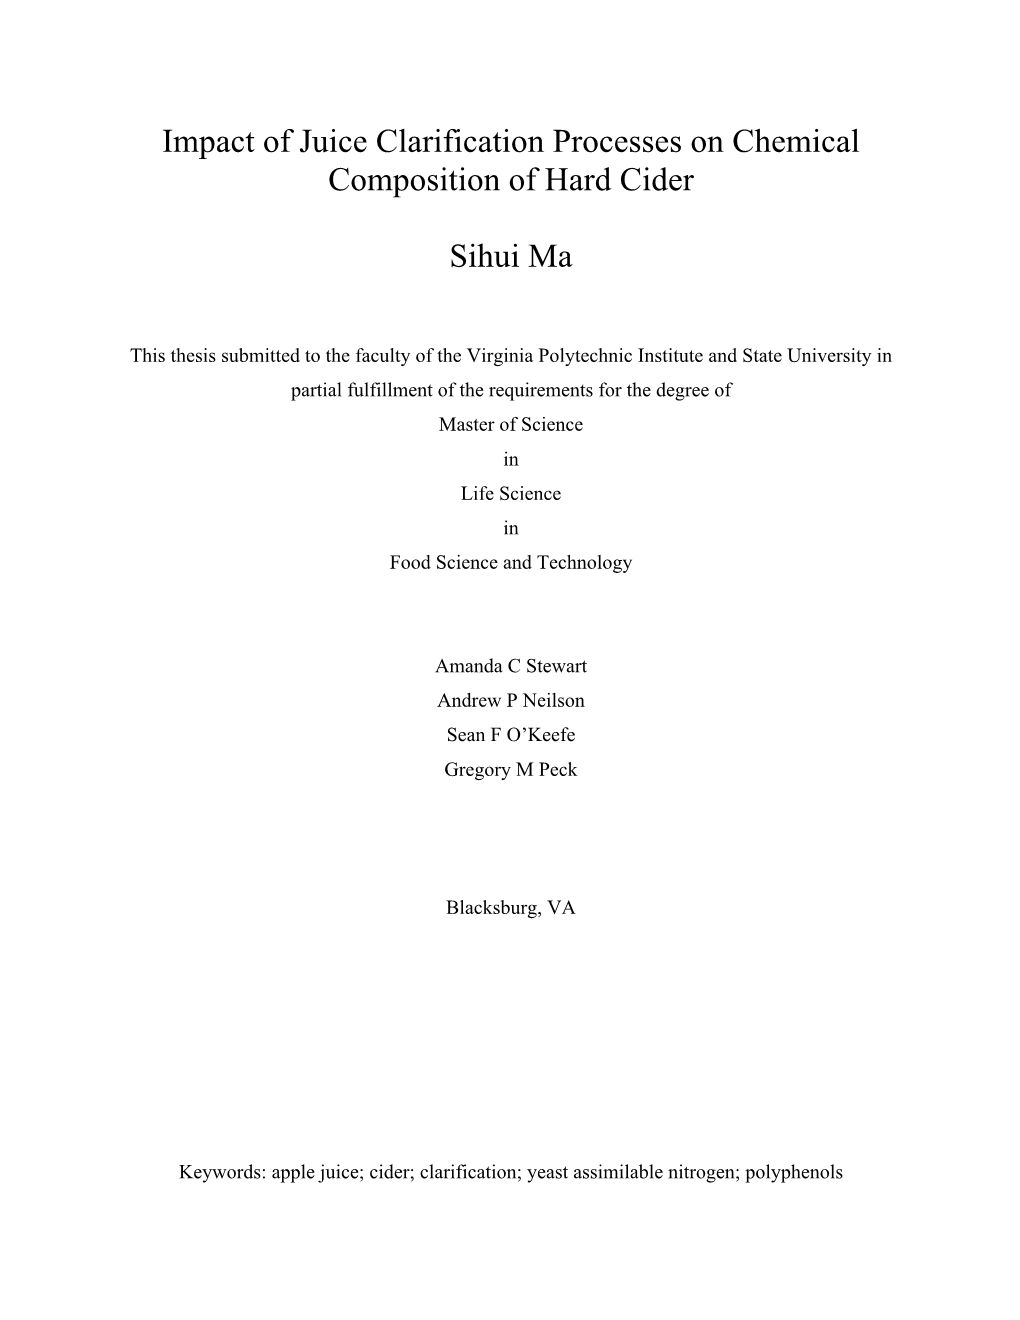 Impact of Juice Clarification Processes on Chemical Composition of Hard Cider